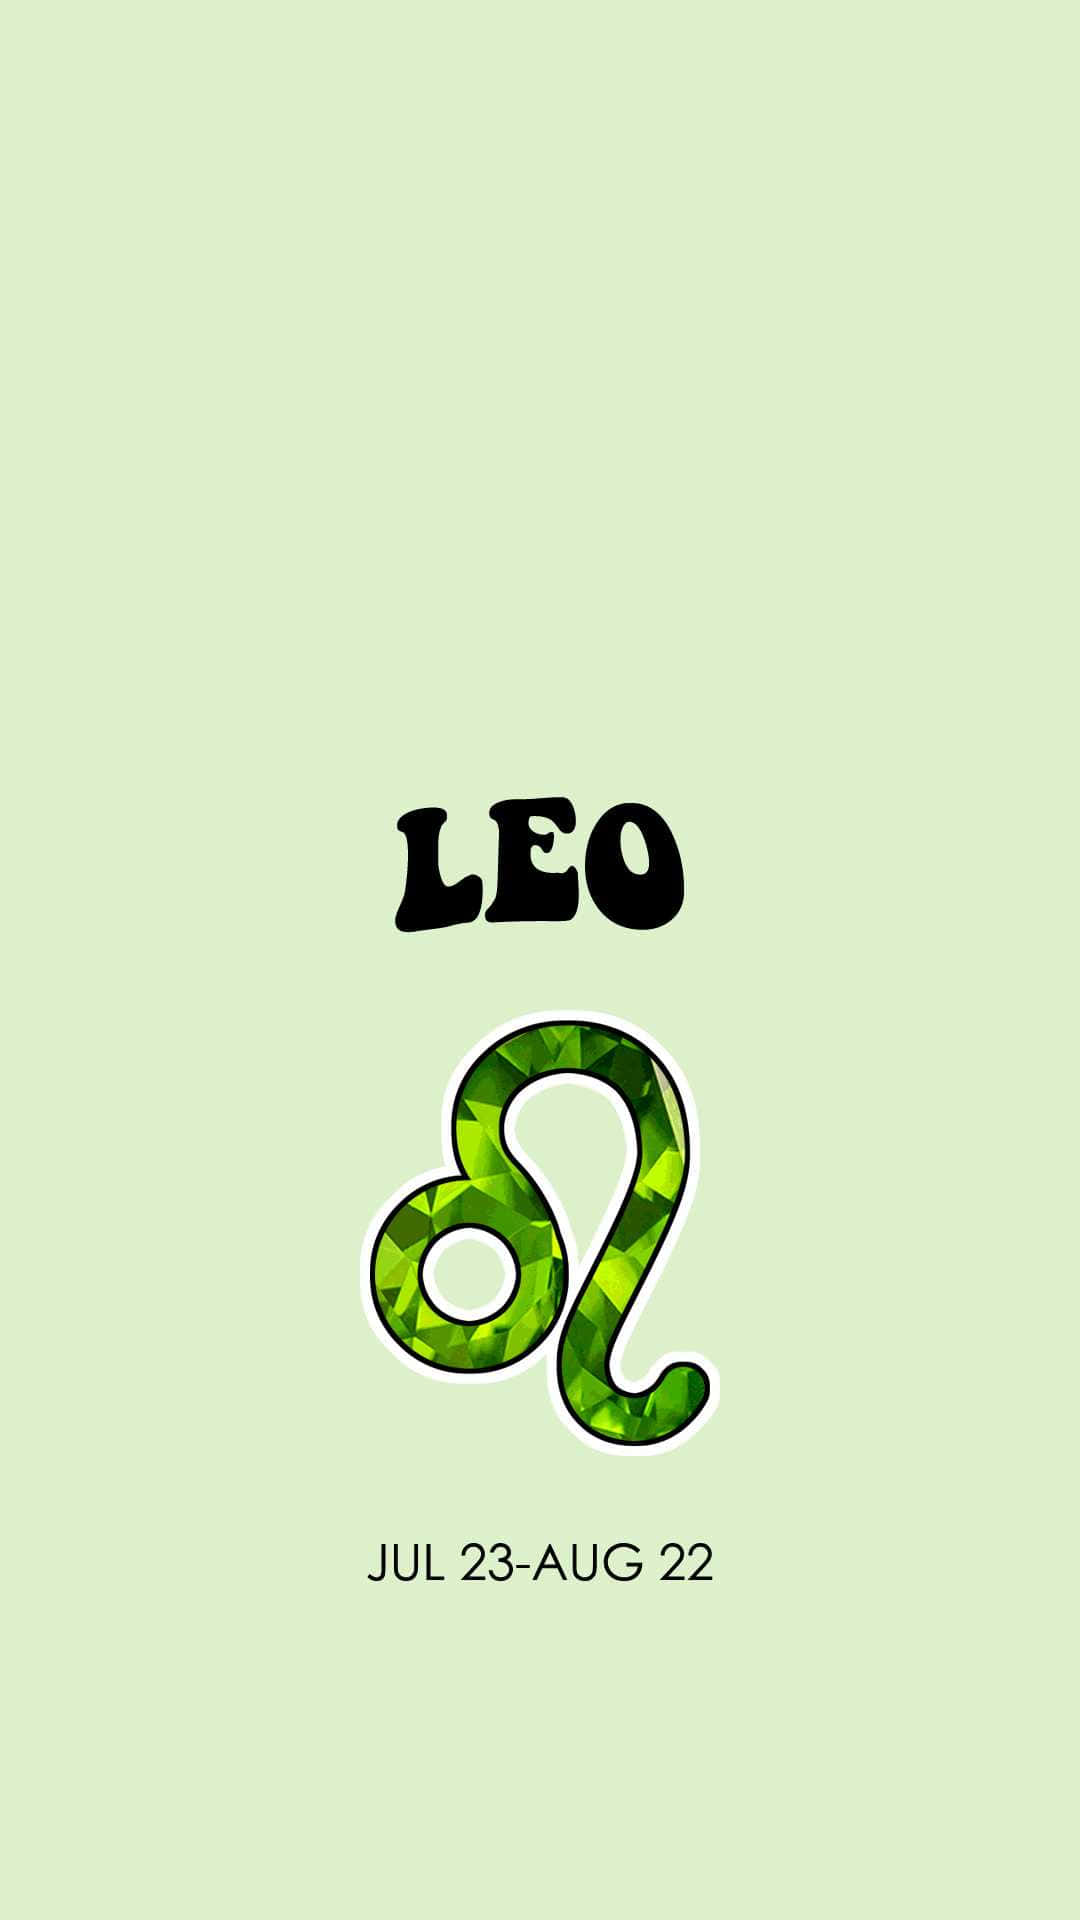 Adorn your wall with a majestic Leo